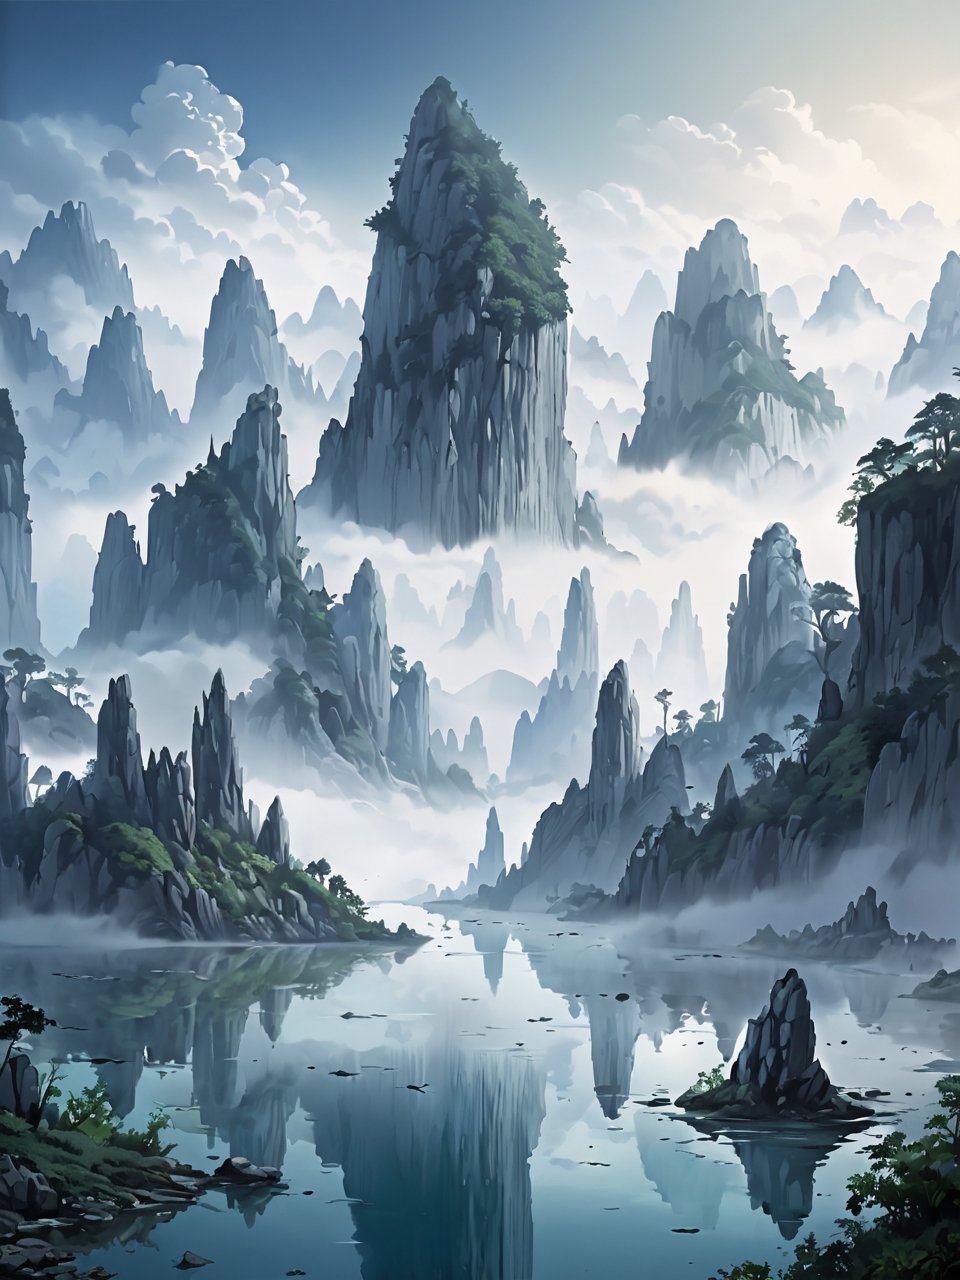 ((extremely detailed illustration)), highres, ((extremely detailed and beautiful background)), (professional illustrasion), (official art), ((Ultra-precise depiction)), ((Ultra-detailed depiction)), beautiful detailed, intricate:1.1,
A mystical karst landscape shrouded in misty fog. Towering limestone pillars rise up from the still waters of a serene lake, their craggy peaks piercing through the low-hanging clouds. The ancient rock formations cast long shadows across the glassy surface, creating an otherworldly reflection. Lush green foliage clings to the base of the mountains, contrasting with the cool grays and blues of the fog-drenched scene. The air has a dream-like haziness, lending an ethereal quality to this primordial vista that seems untouched by time,